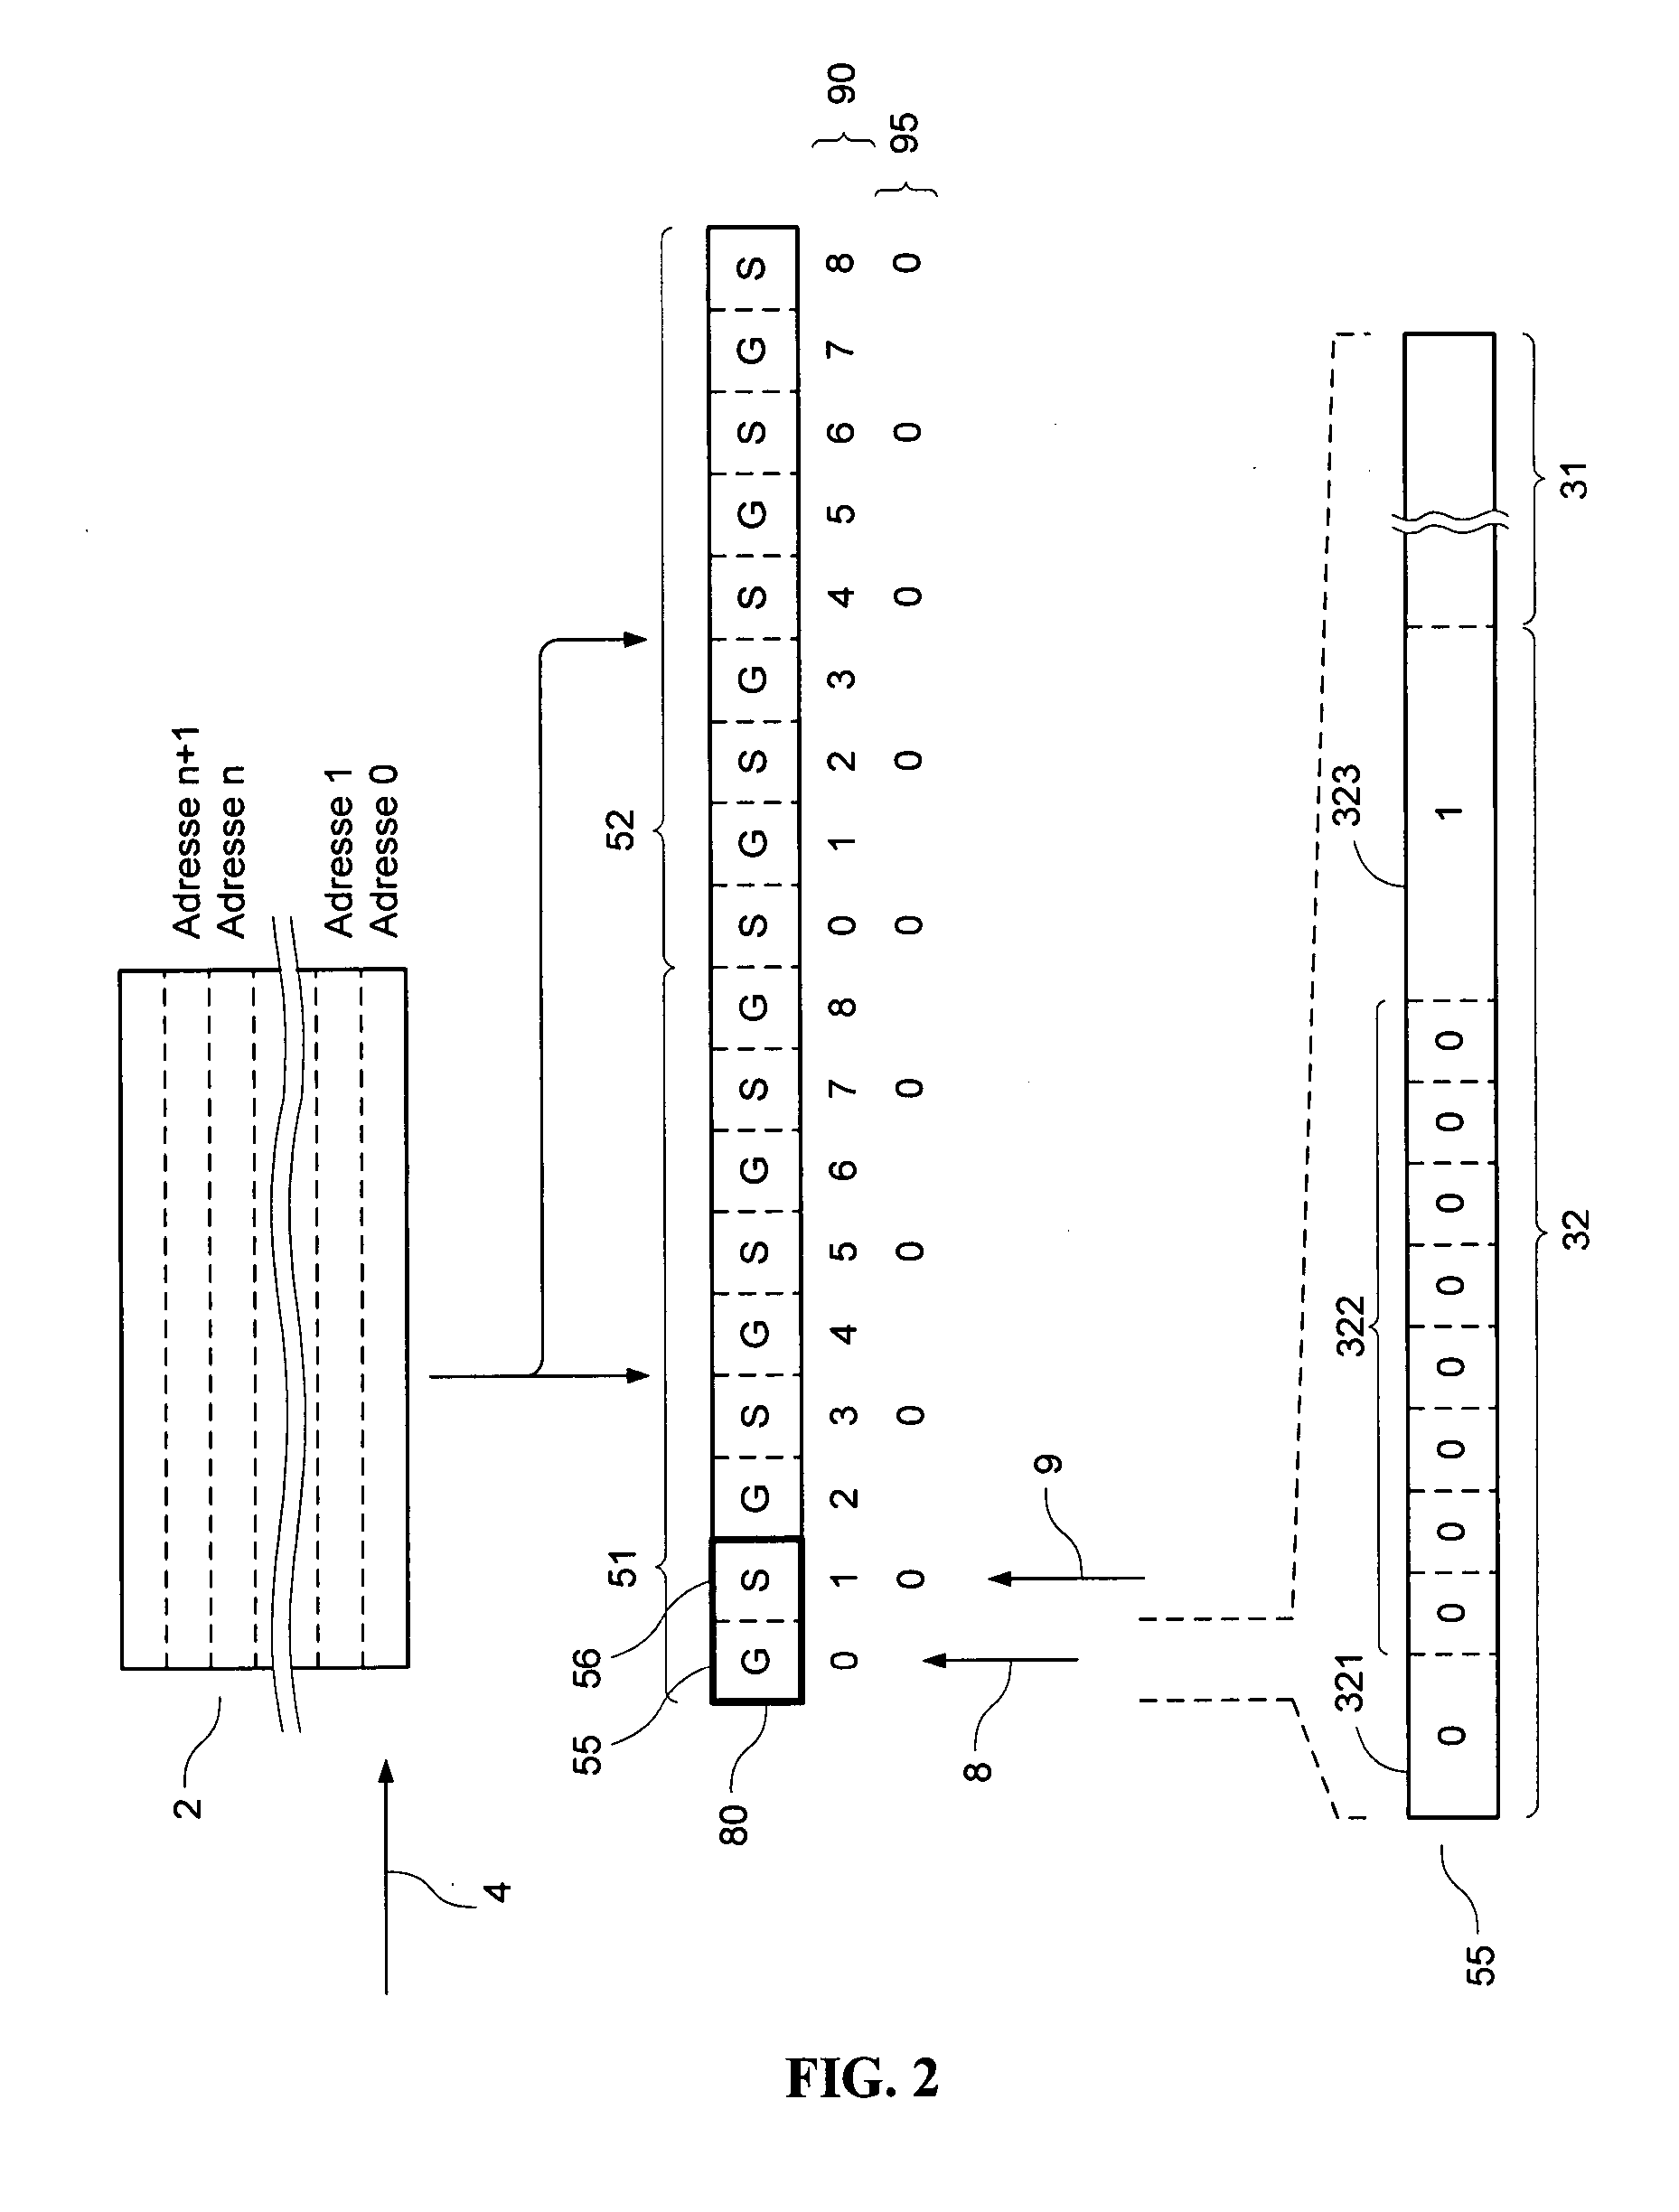 Arrangements for controlling instruction and data flow in a multi-processor environment